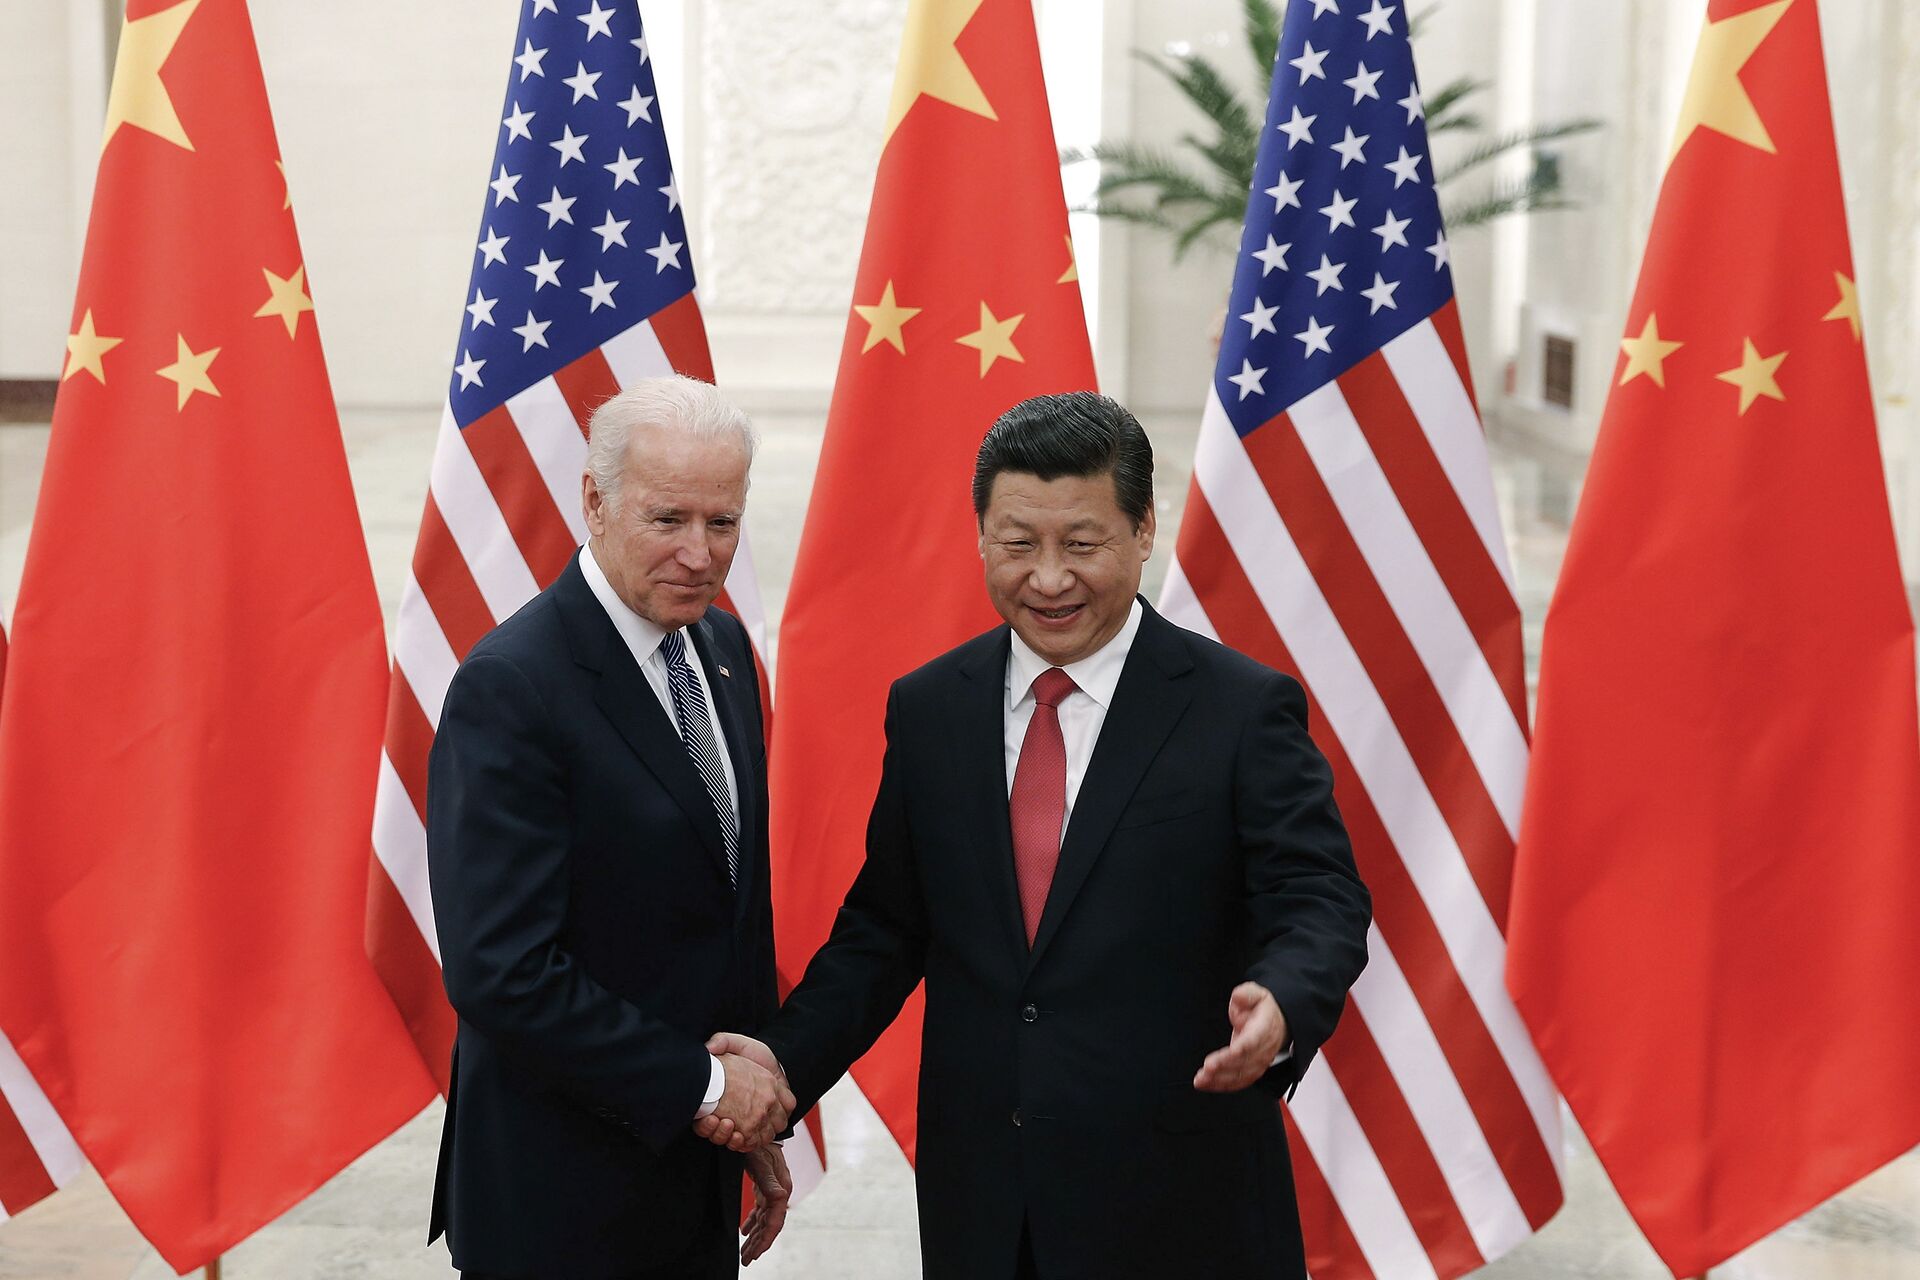 FILE - In this Dec. 4, 2013, file photo, Chinese President Xi Jinping, right, shakes hands with then U.S. Vice President Joe Biden as they pose for photos at the Great Hall of the People in Beijing. - Sputnik International, 1920, 12.11.2021